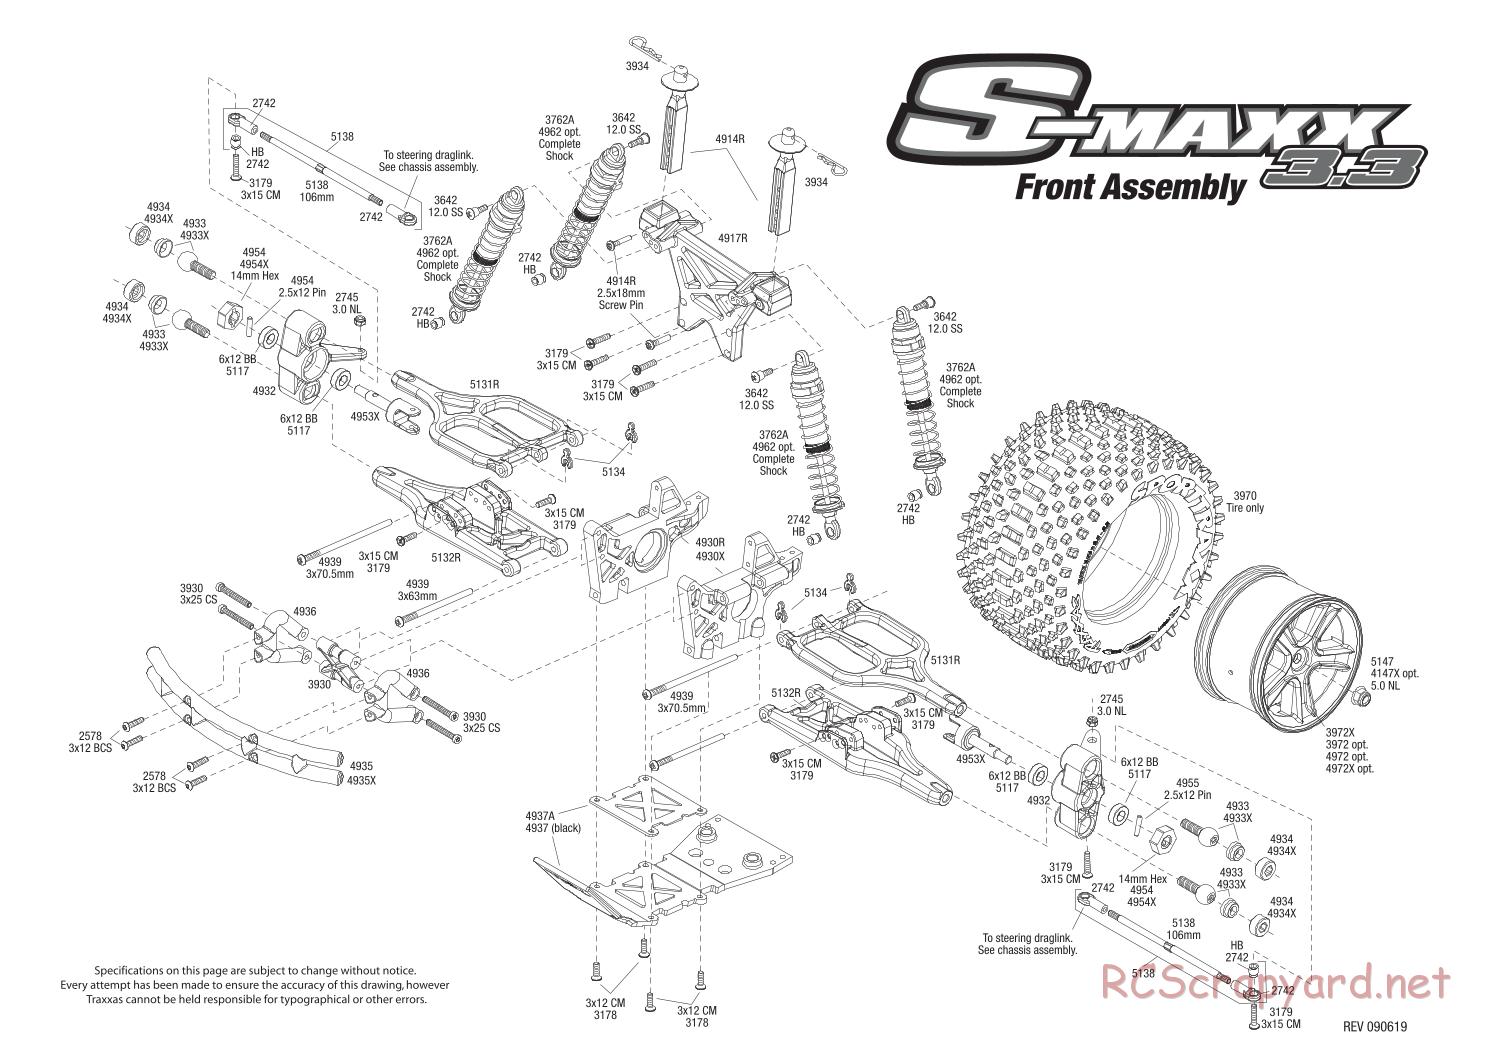 Traxxas - S-Maxx 3.3 (2009) - Exploded Views - Page 2